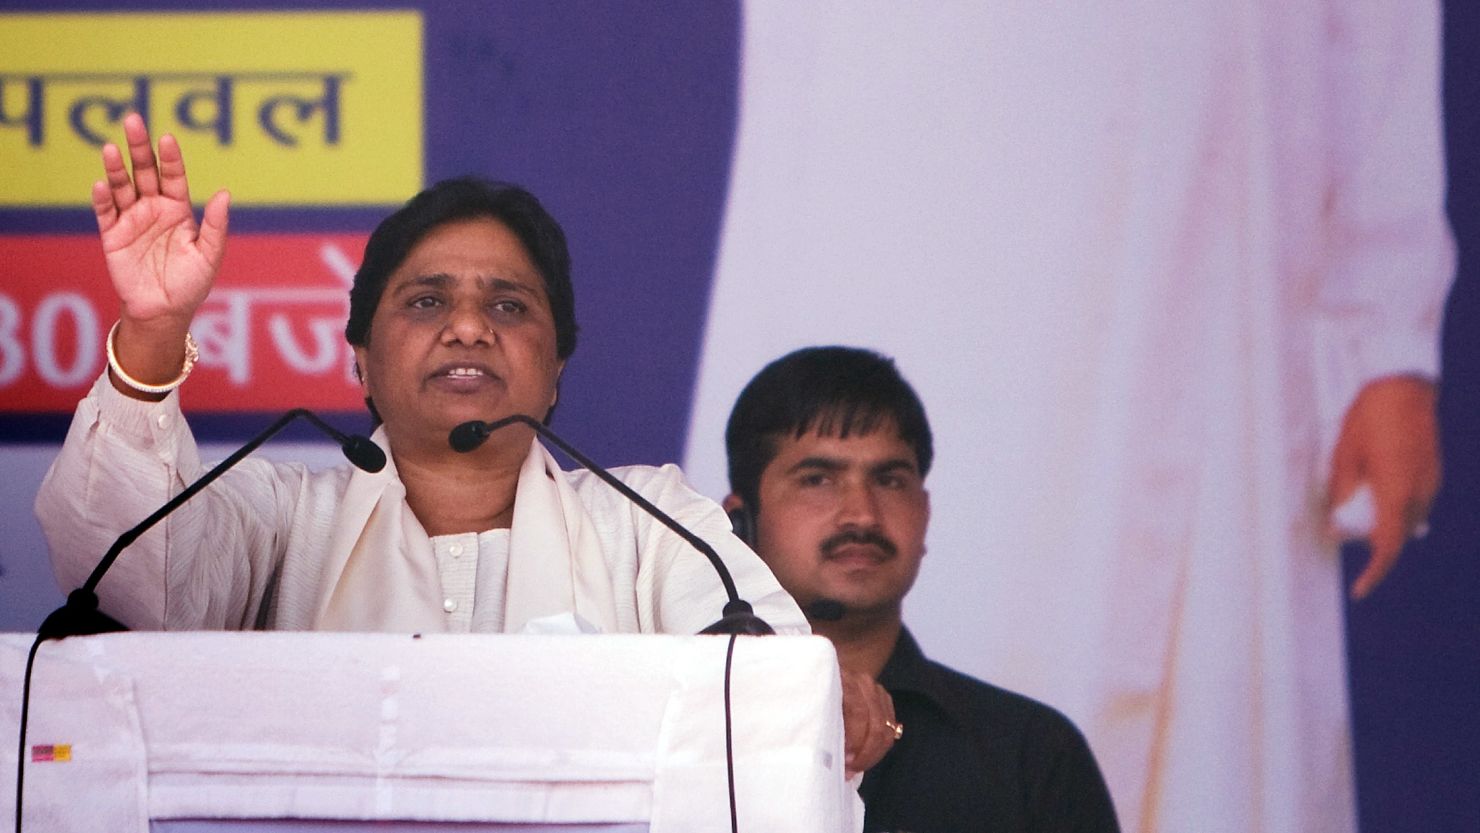 Chief minister Mayawati led her Bahujan Samaj Party (BSP) to an overwhelming victory in state elections in 2007.